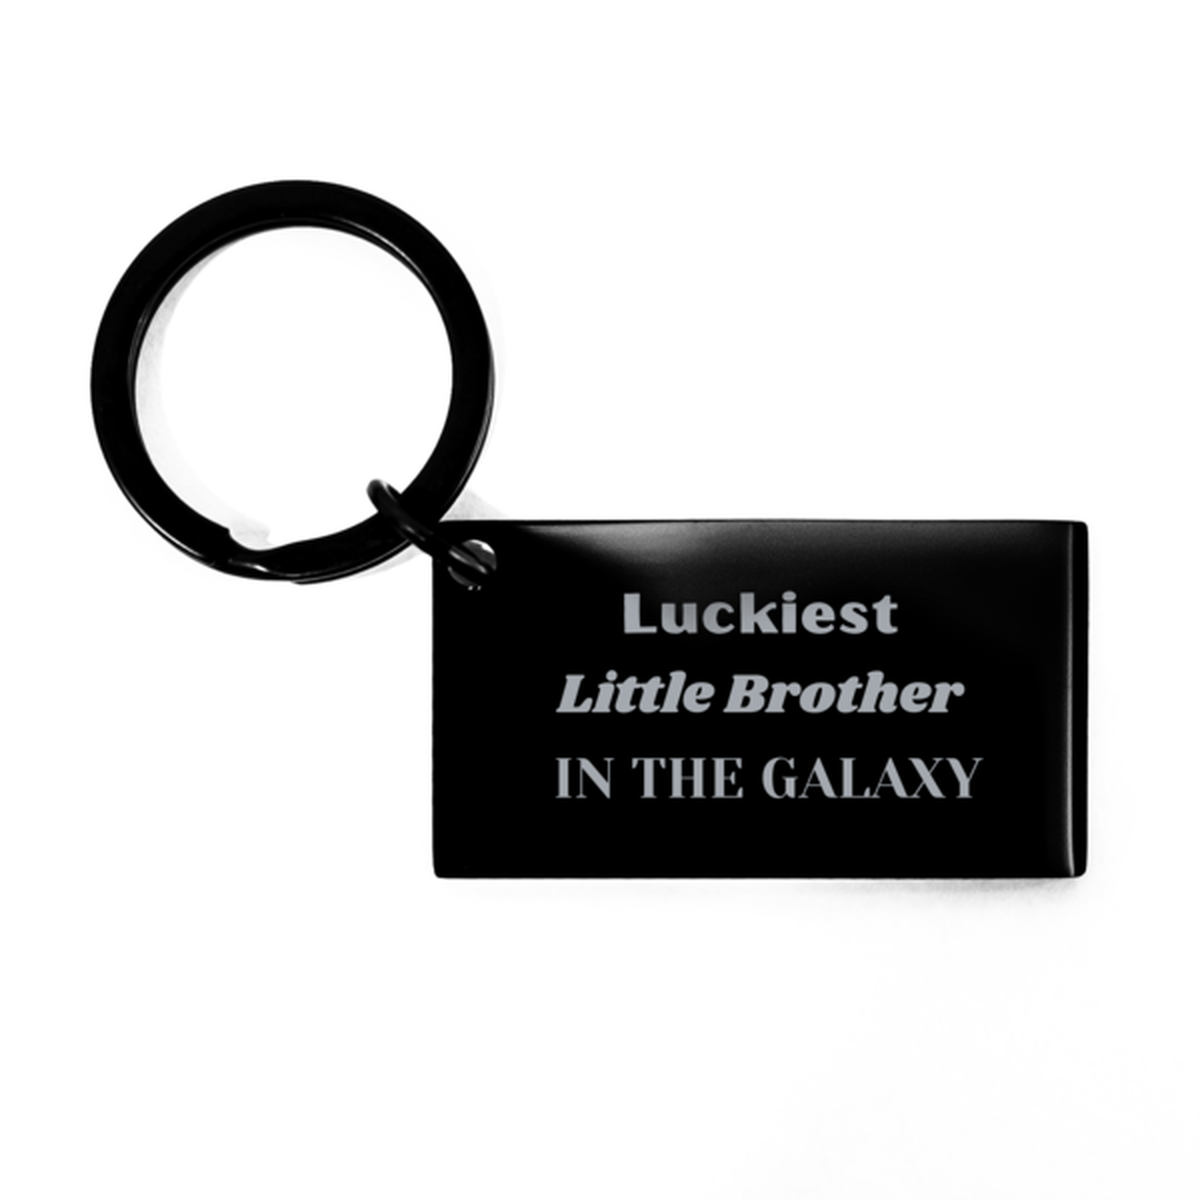 Luckiest Little Brother in the Galaxy, To My Little Brother Engraved Gifts, Christmas Little Brother Keychain Gifts, X-mas Birthday Unique Gifts For Little Brother Men Women